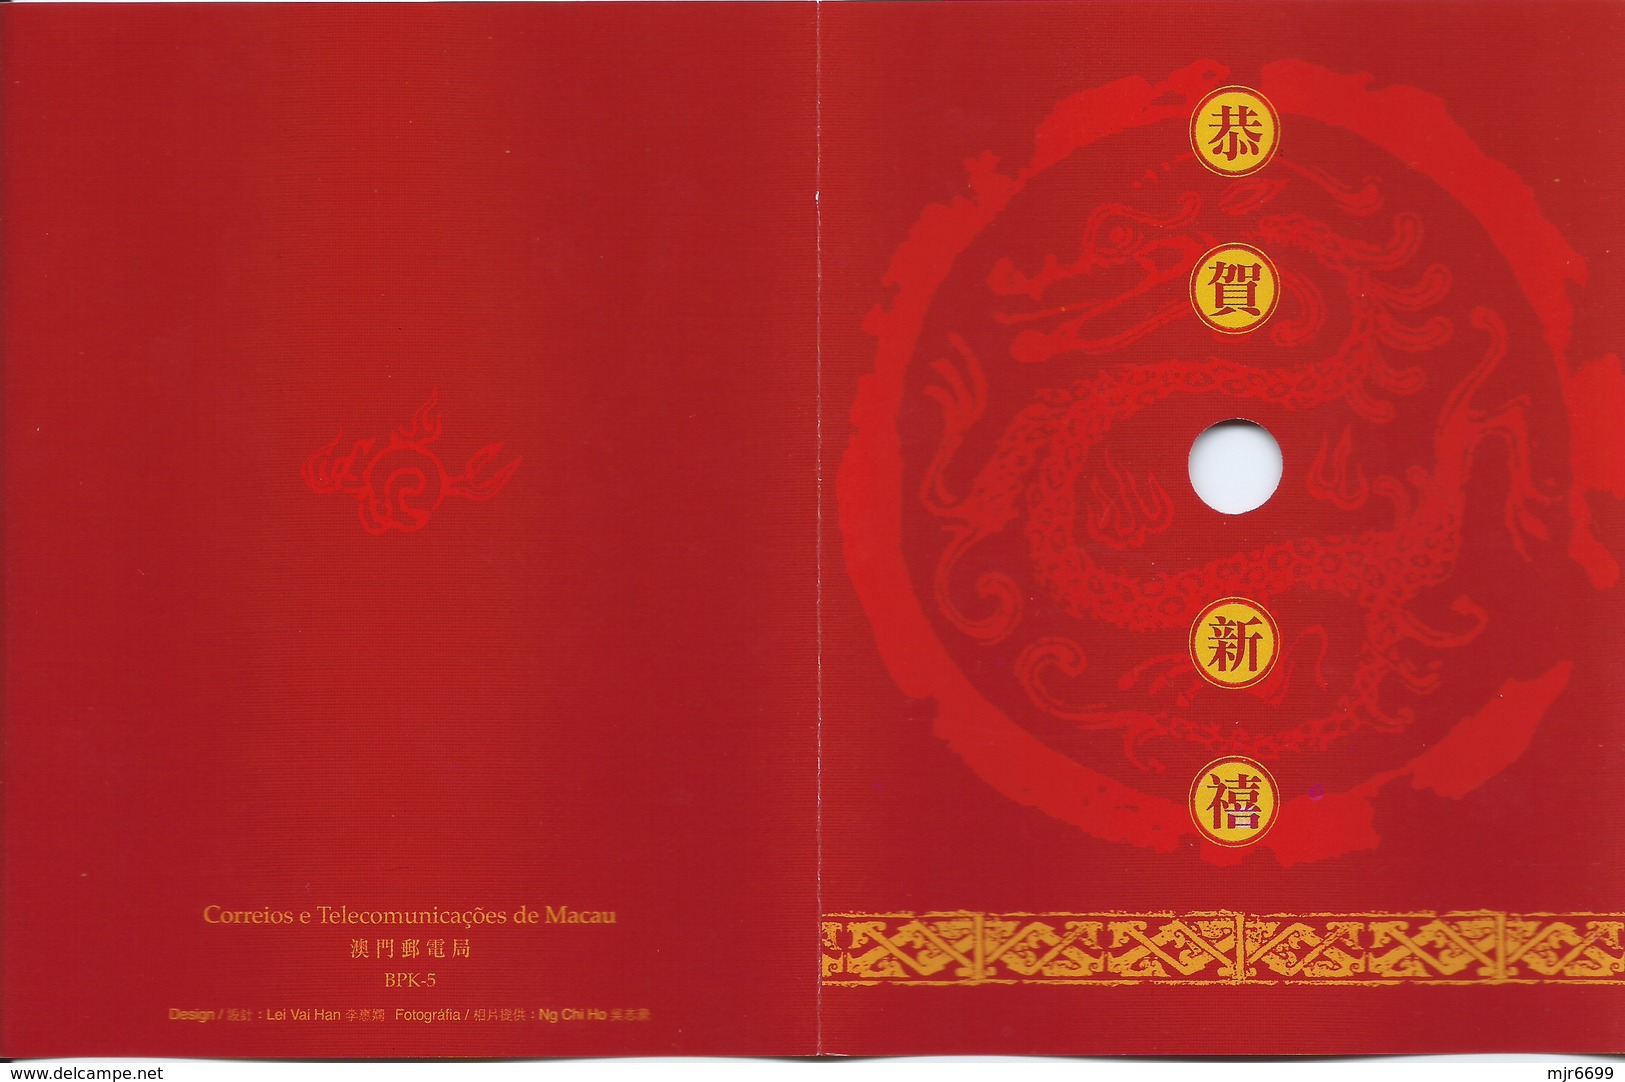 MACAU 1999 NEW YEAR GREETING CARD & POSTAGE PAID COVERLOCAL USAGE, POST OFFICE CODE #BPK005 - Entiers Postaux